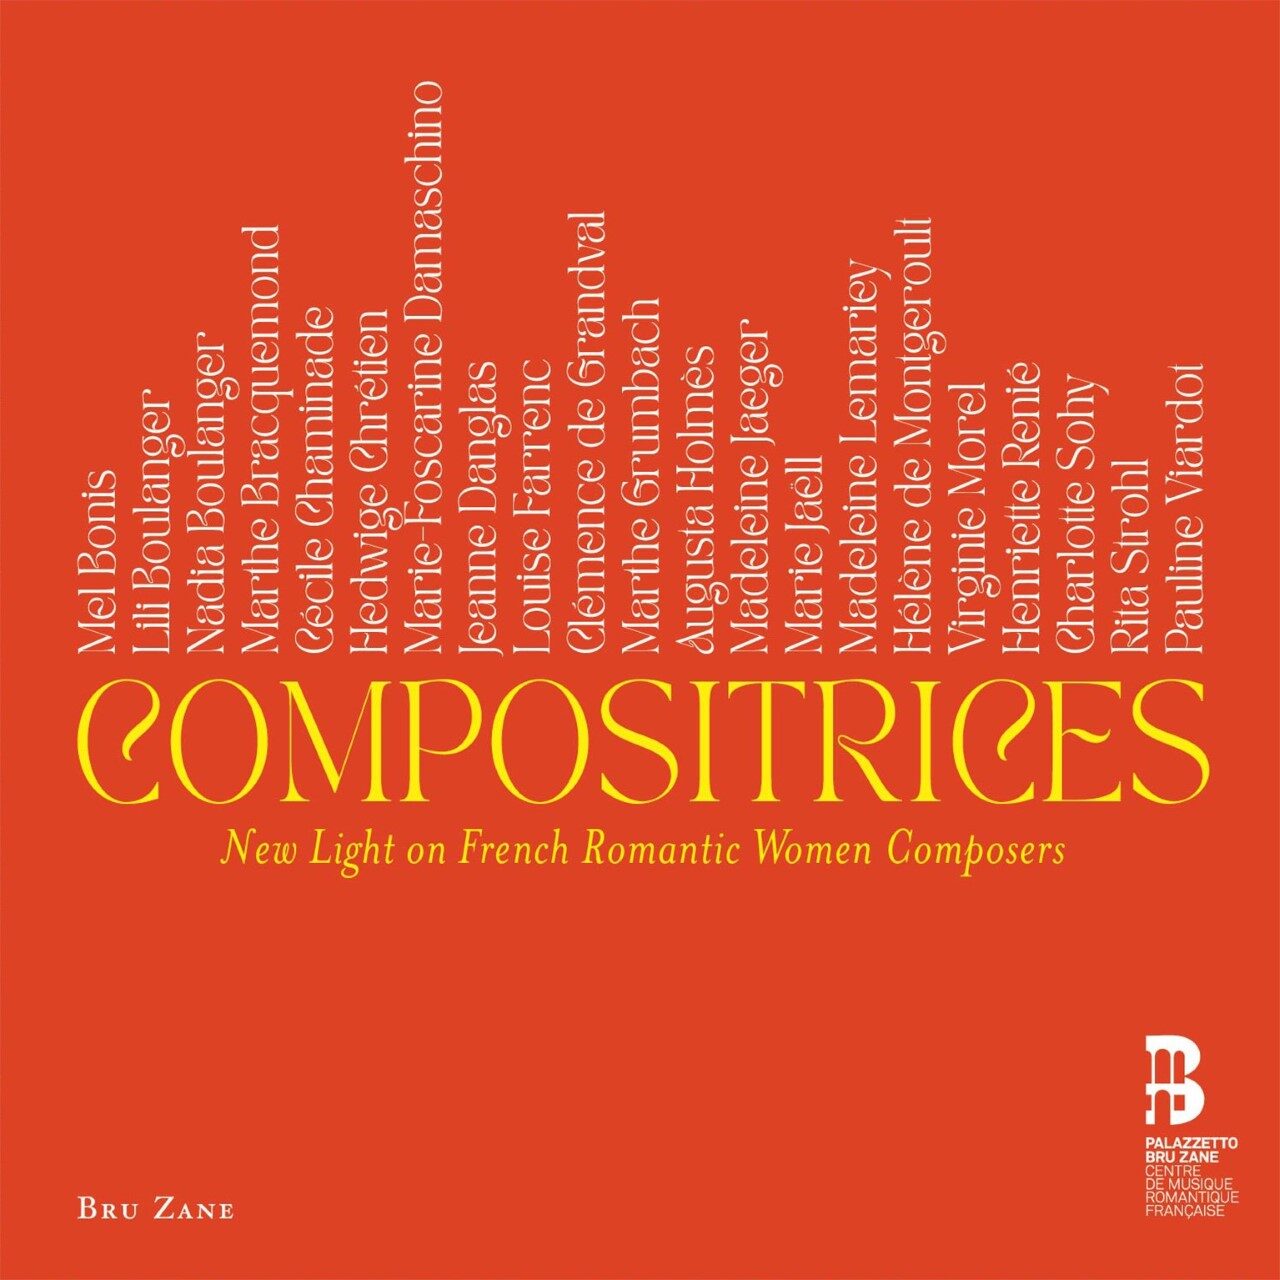 Compositrices - Discographie